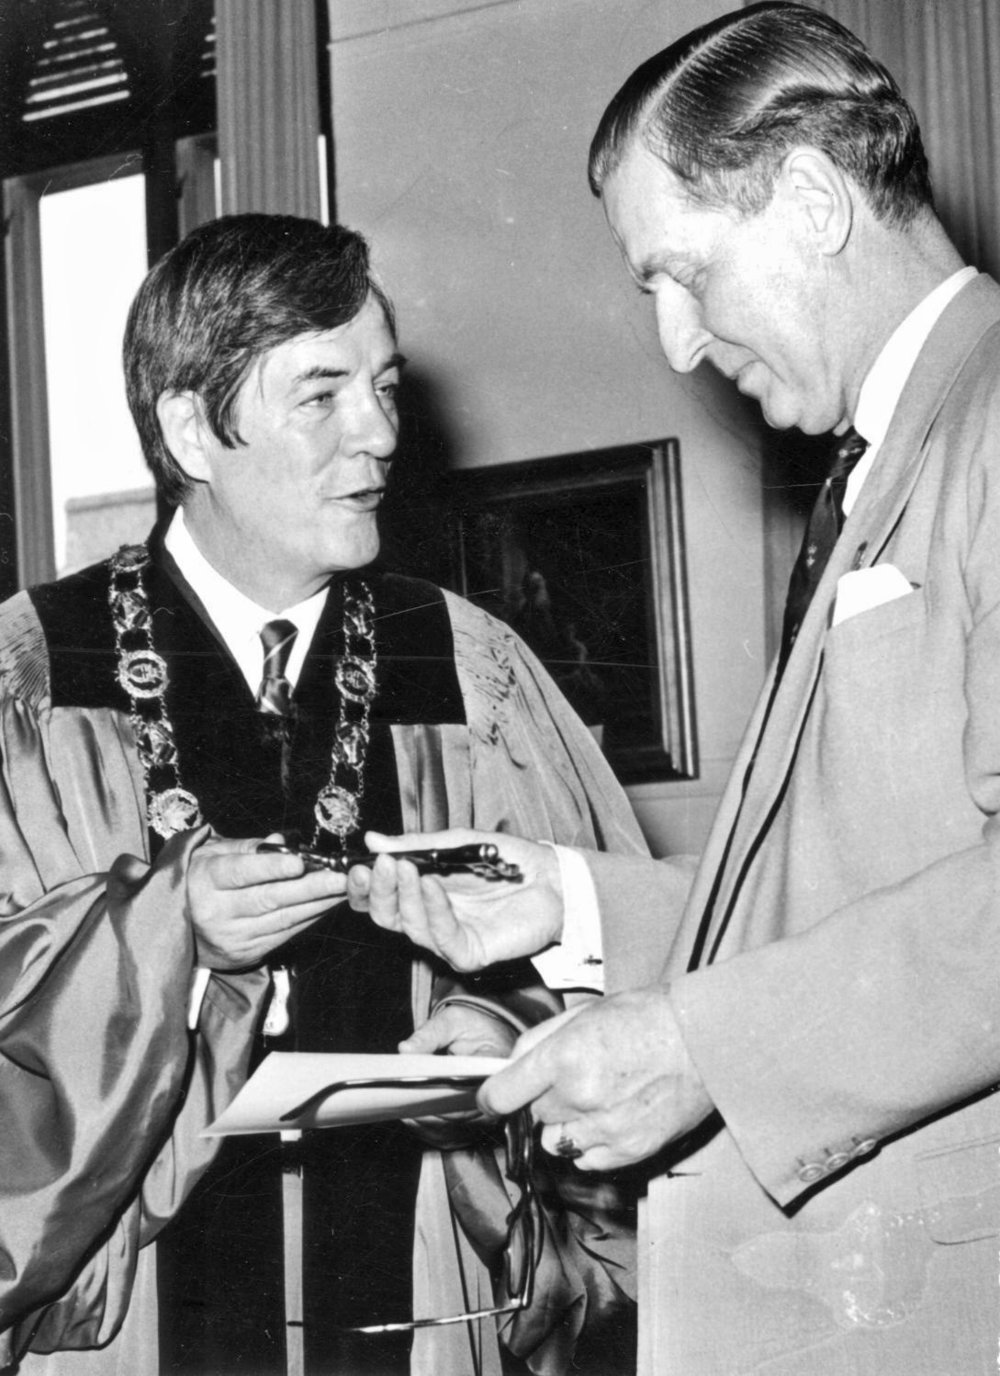 Russell Scott, wearing chain of office as mayor of Belleville, is shown presenting the key to the city to an unidentified recipient. Dr. Scott was distinguished by an approachable and down-to-earth demeanour. Photo courtesy of Belleville and Hastings County Community Archives.